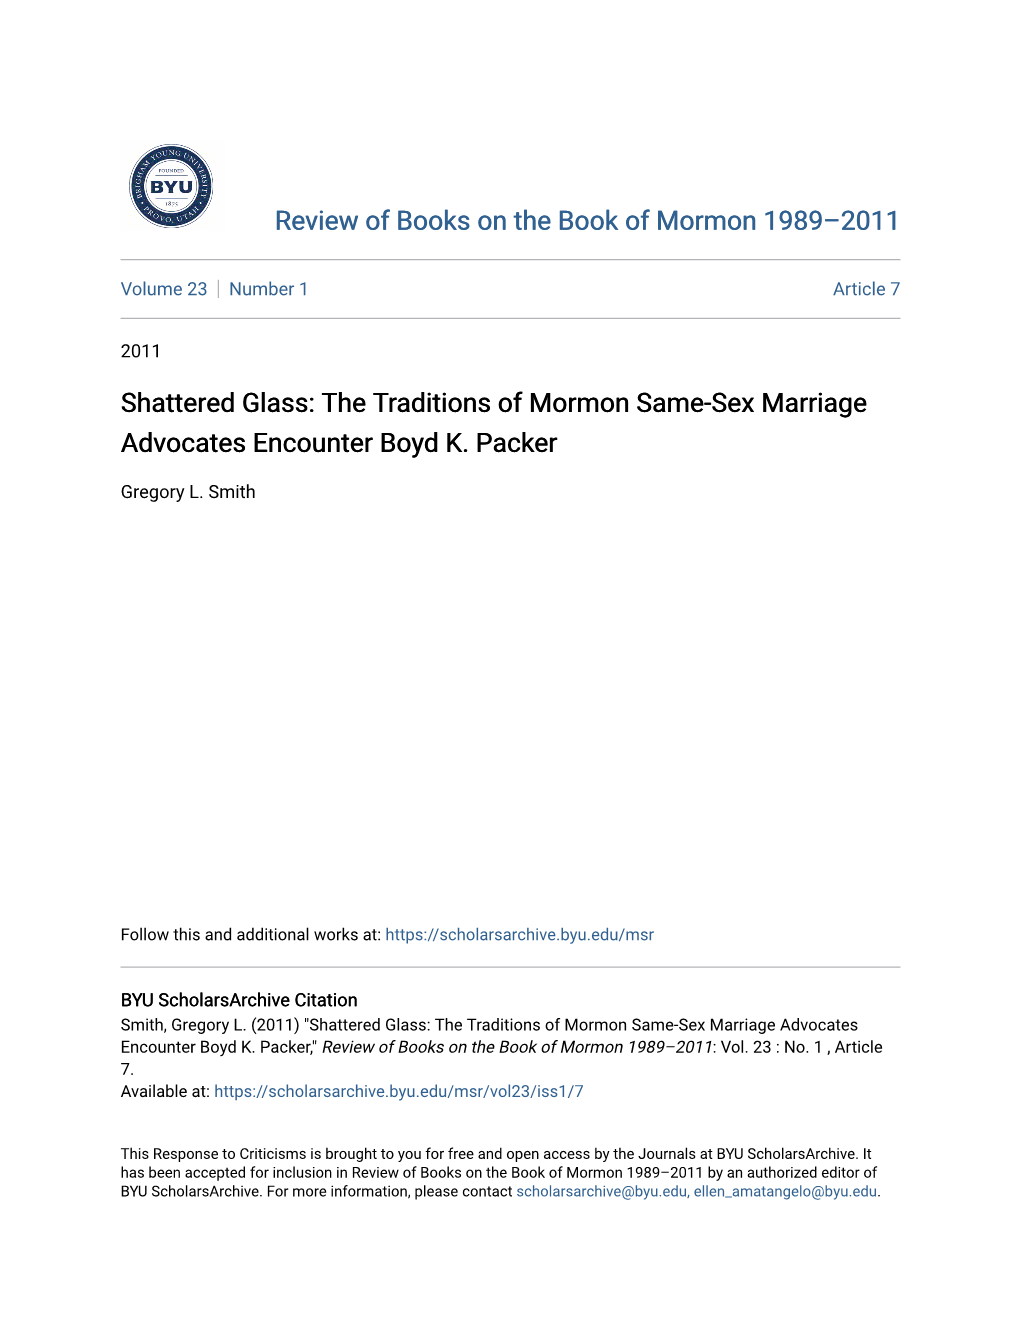 The Traditions of Mormon Same-Sex Marriage Advocates Encounter Boyd K